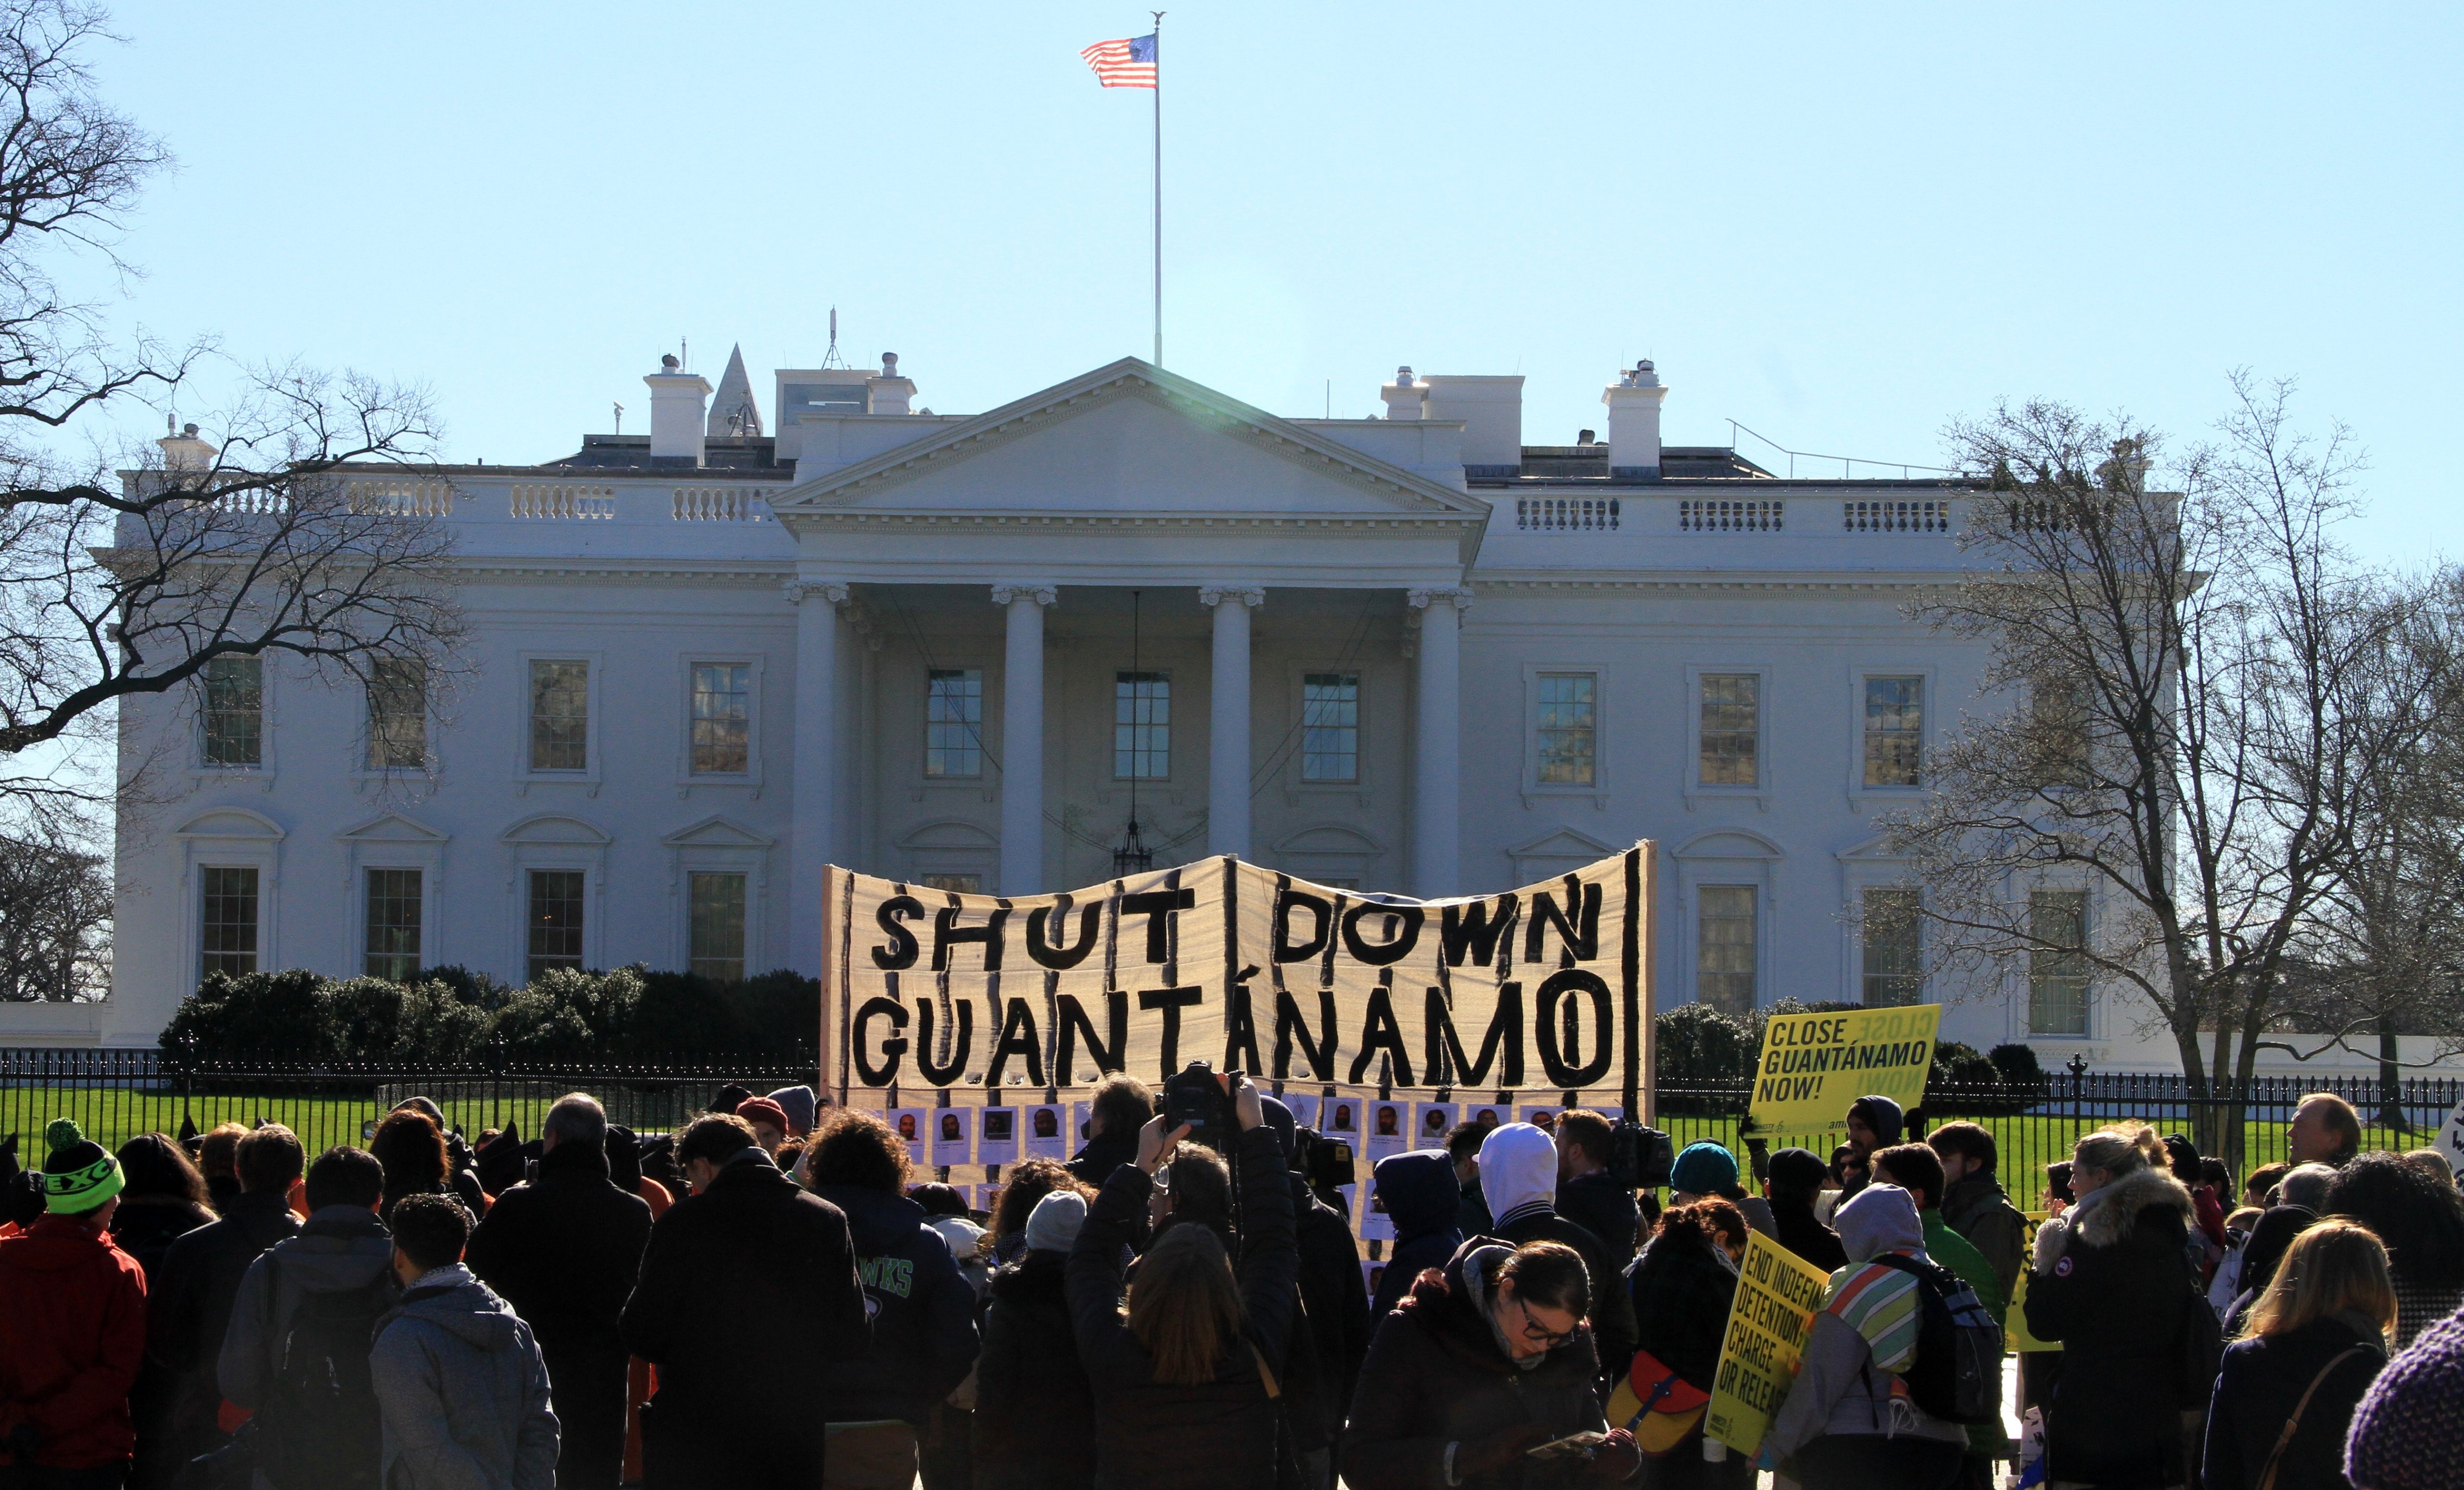 Protesters hold banners during a protest in front of the White House in Washington D.C. on Jan. 11, 2016. (Erkan Avci—Anadolu Agency/Getty Images)